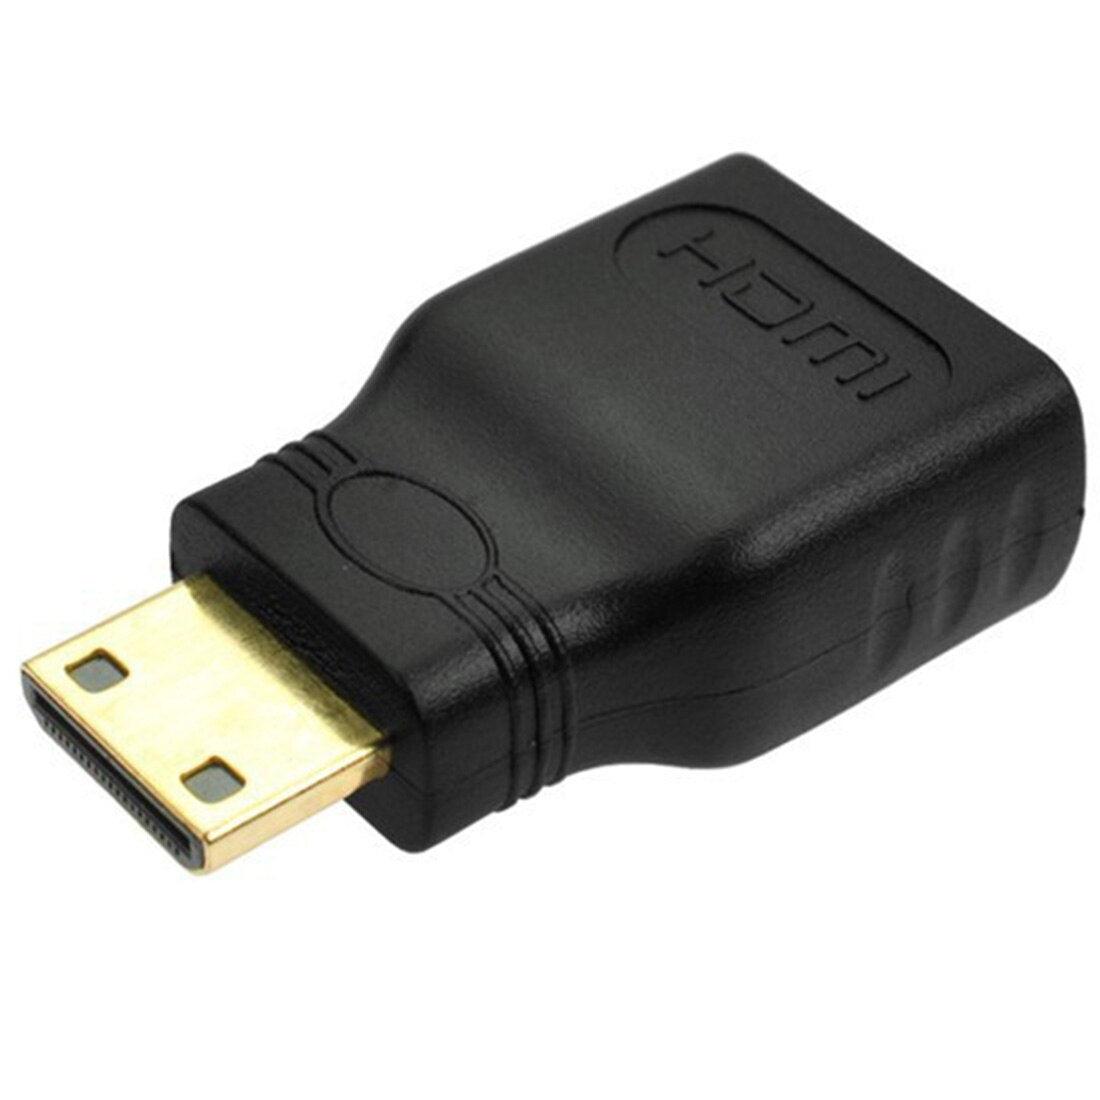 1 pcs Gold-Plated 1080P Mini Male HDMI To Standard HDMI Female Extension Adapter - Glowish